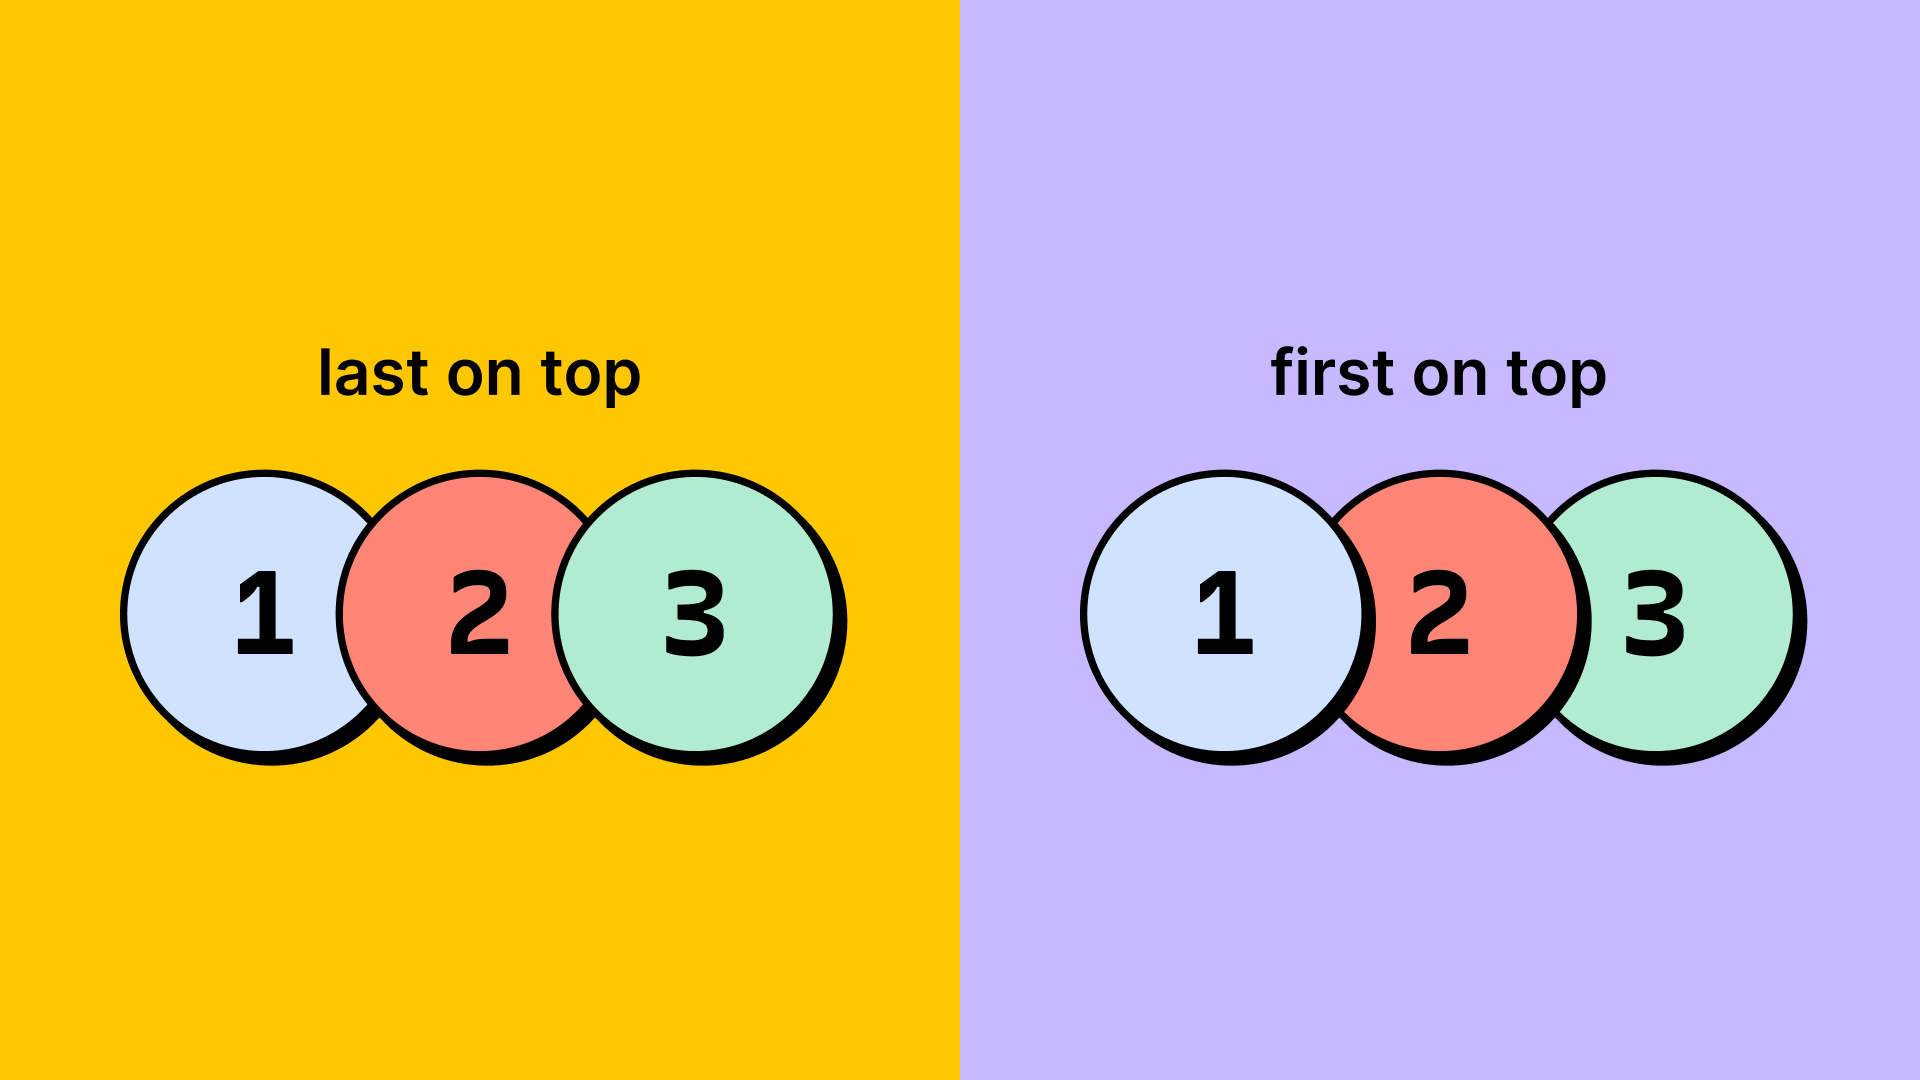 side by side comparison of last on top and first on top